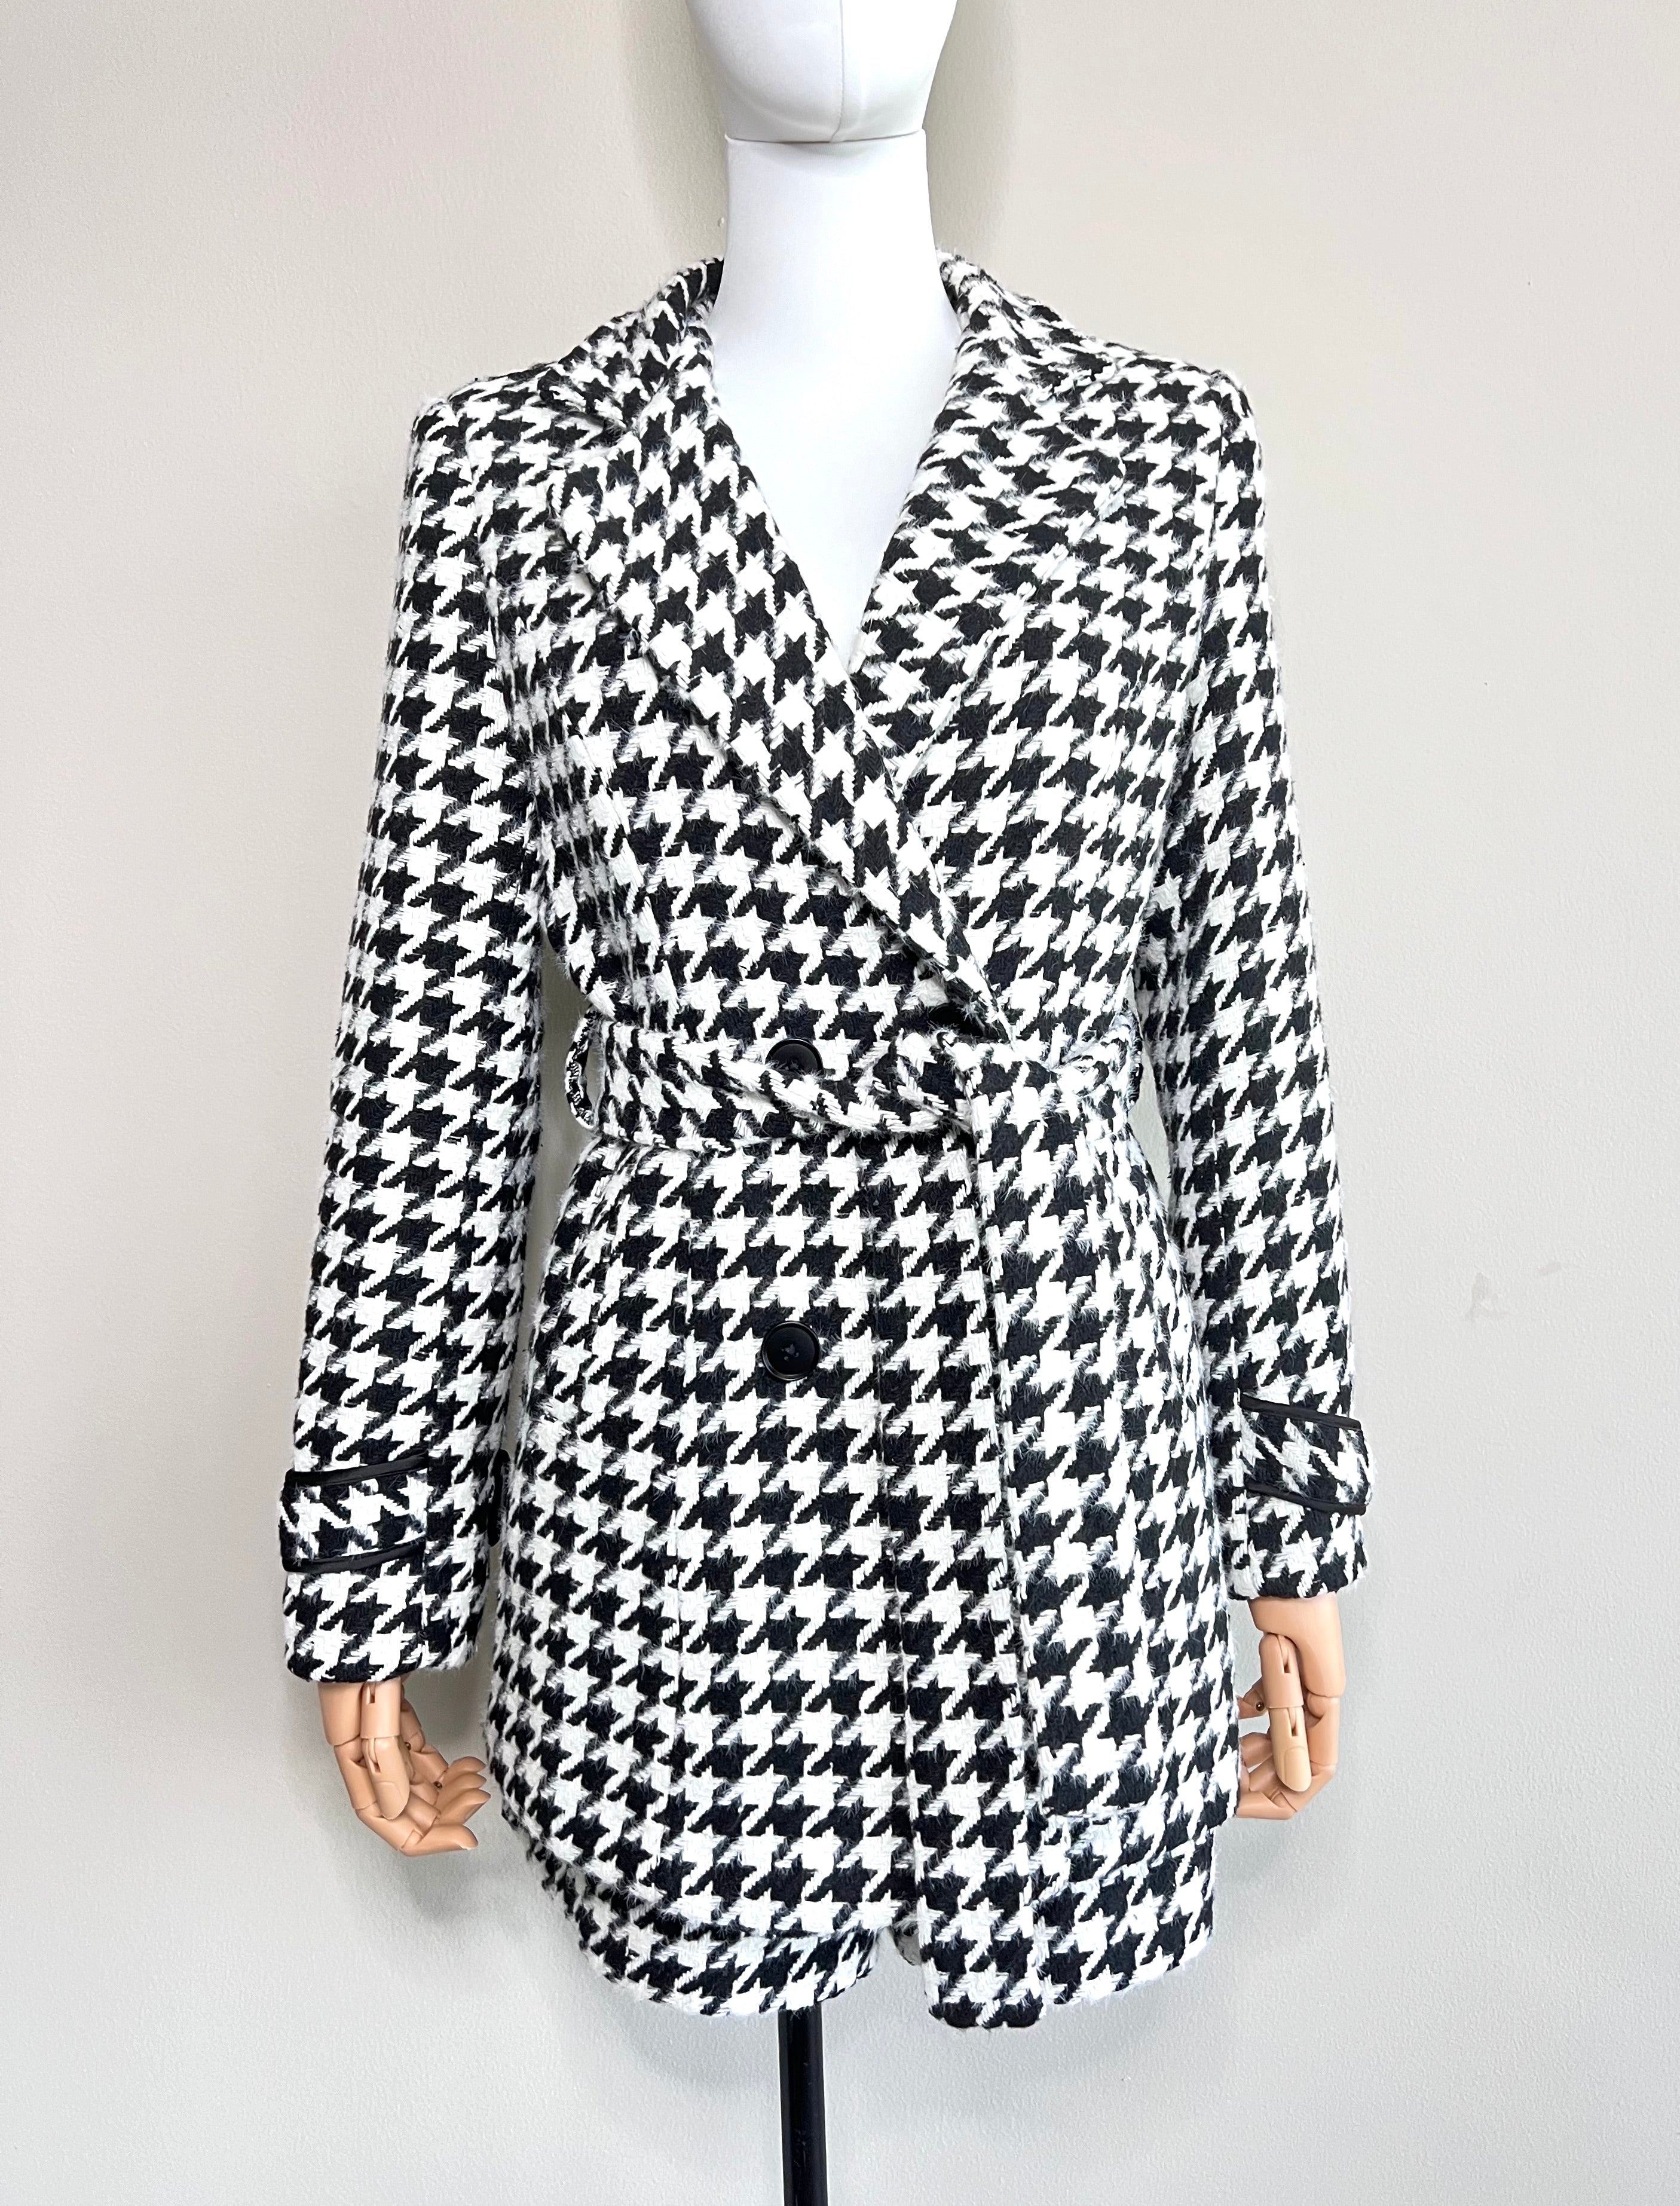 A set of houndstooth double button print suit & shorts